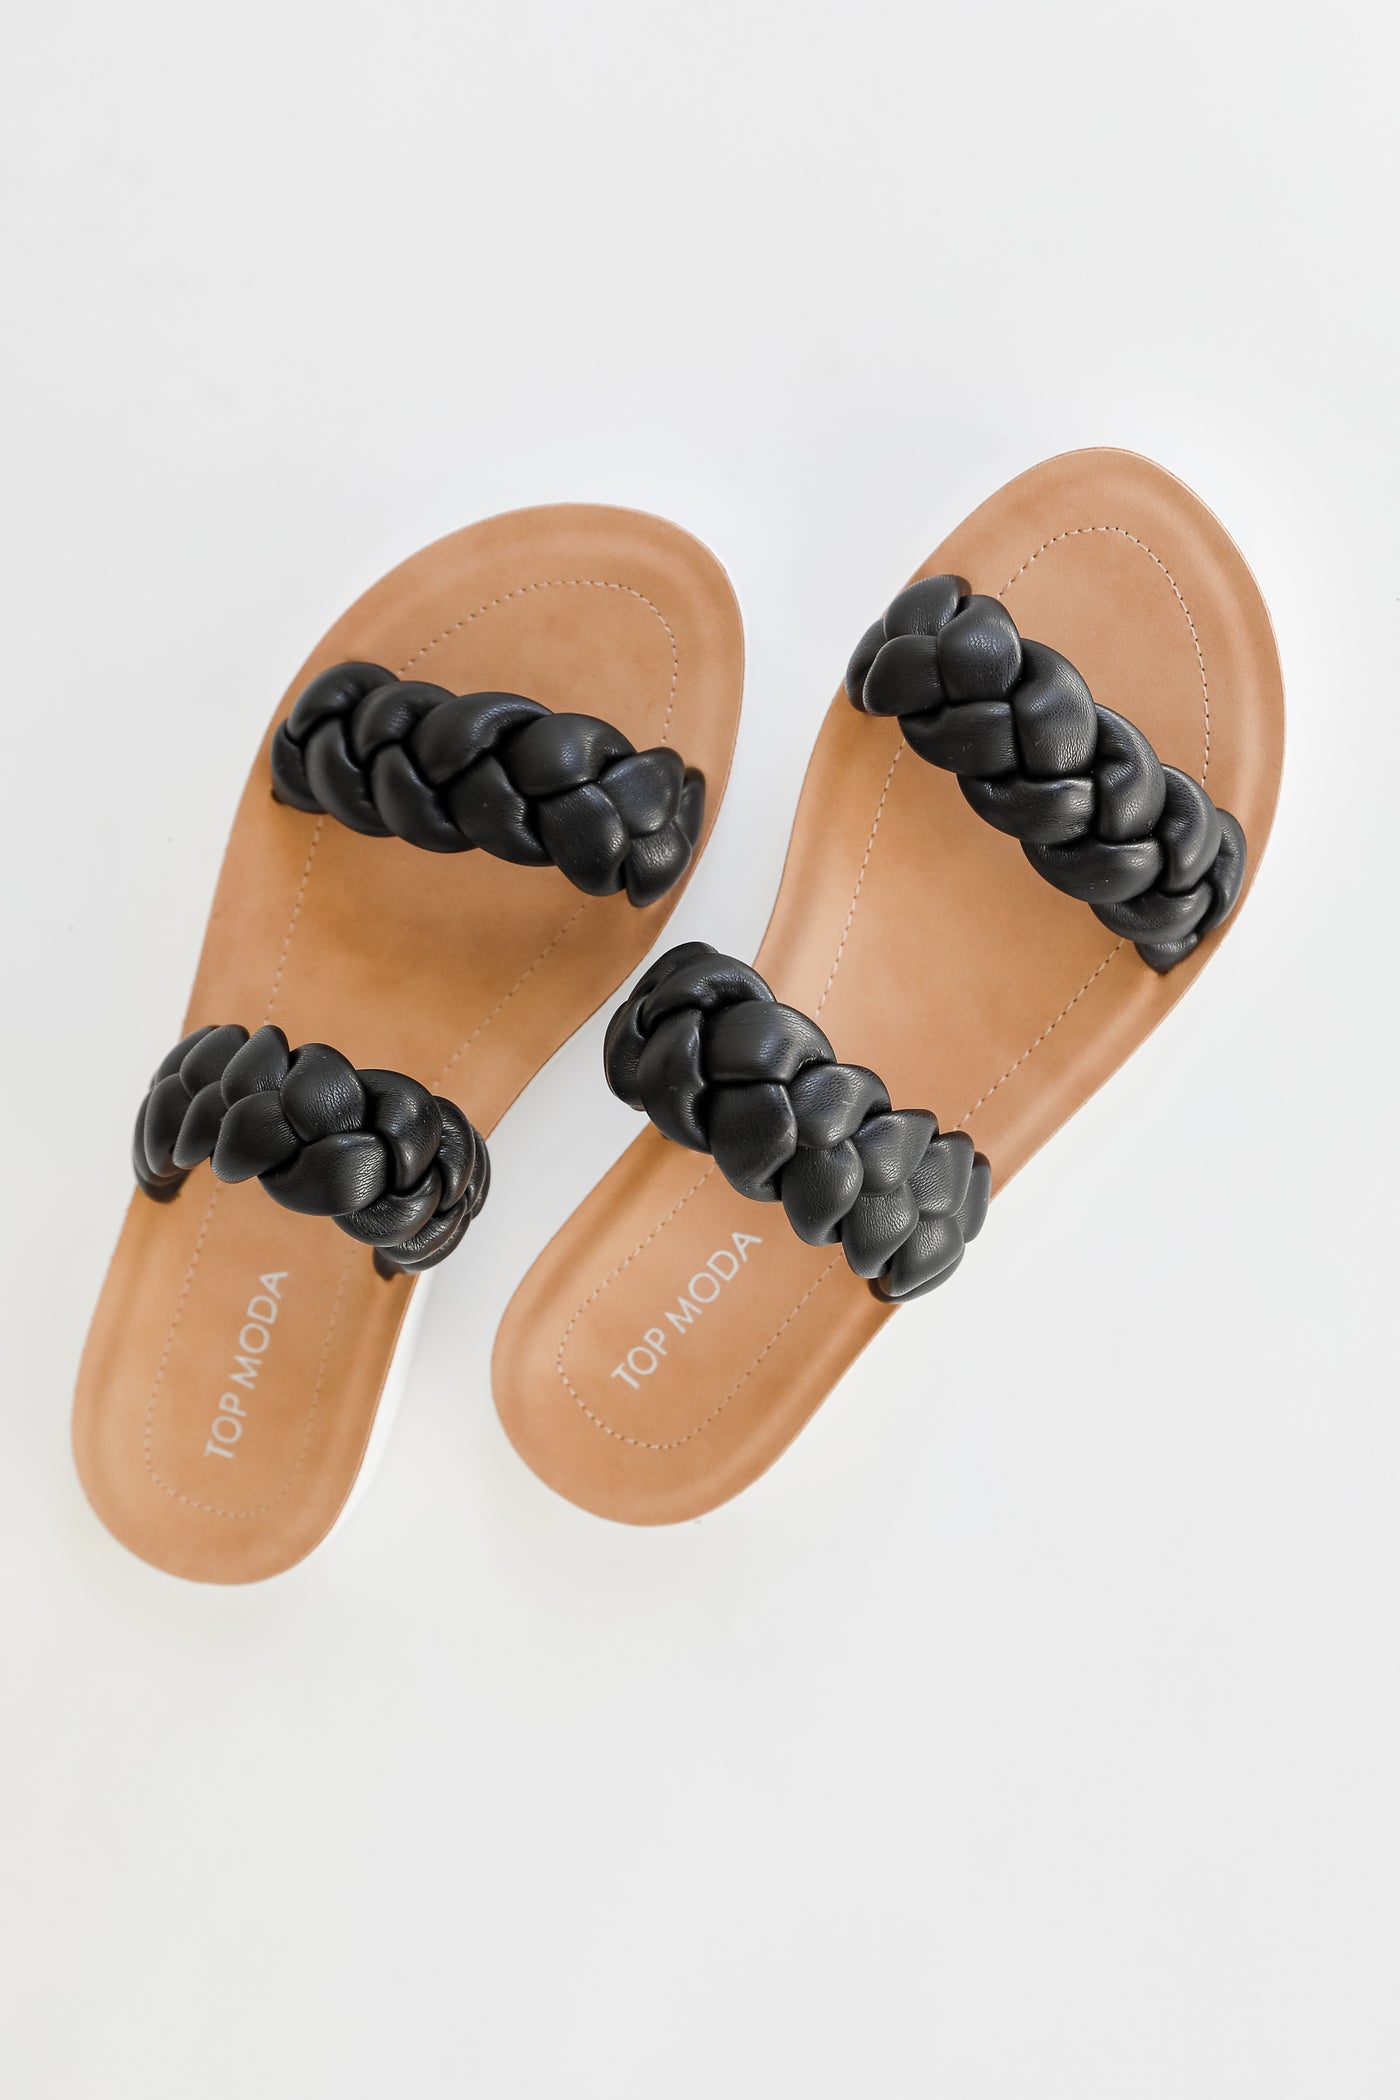 Braided Double Strap Sandals in black top view